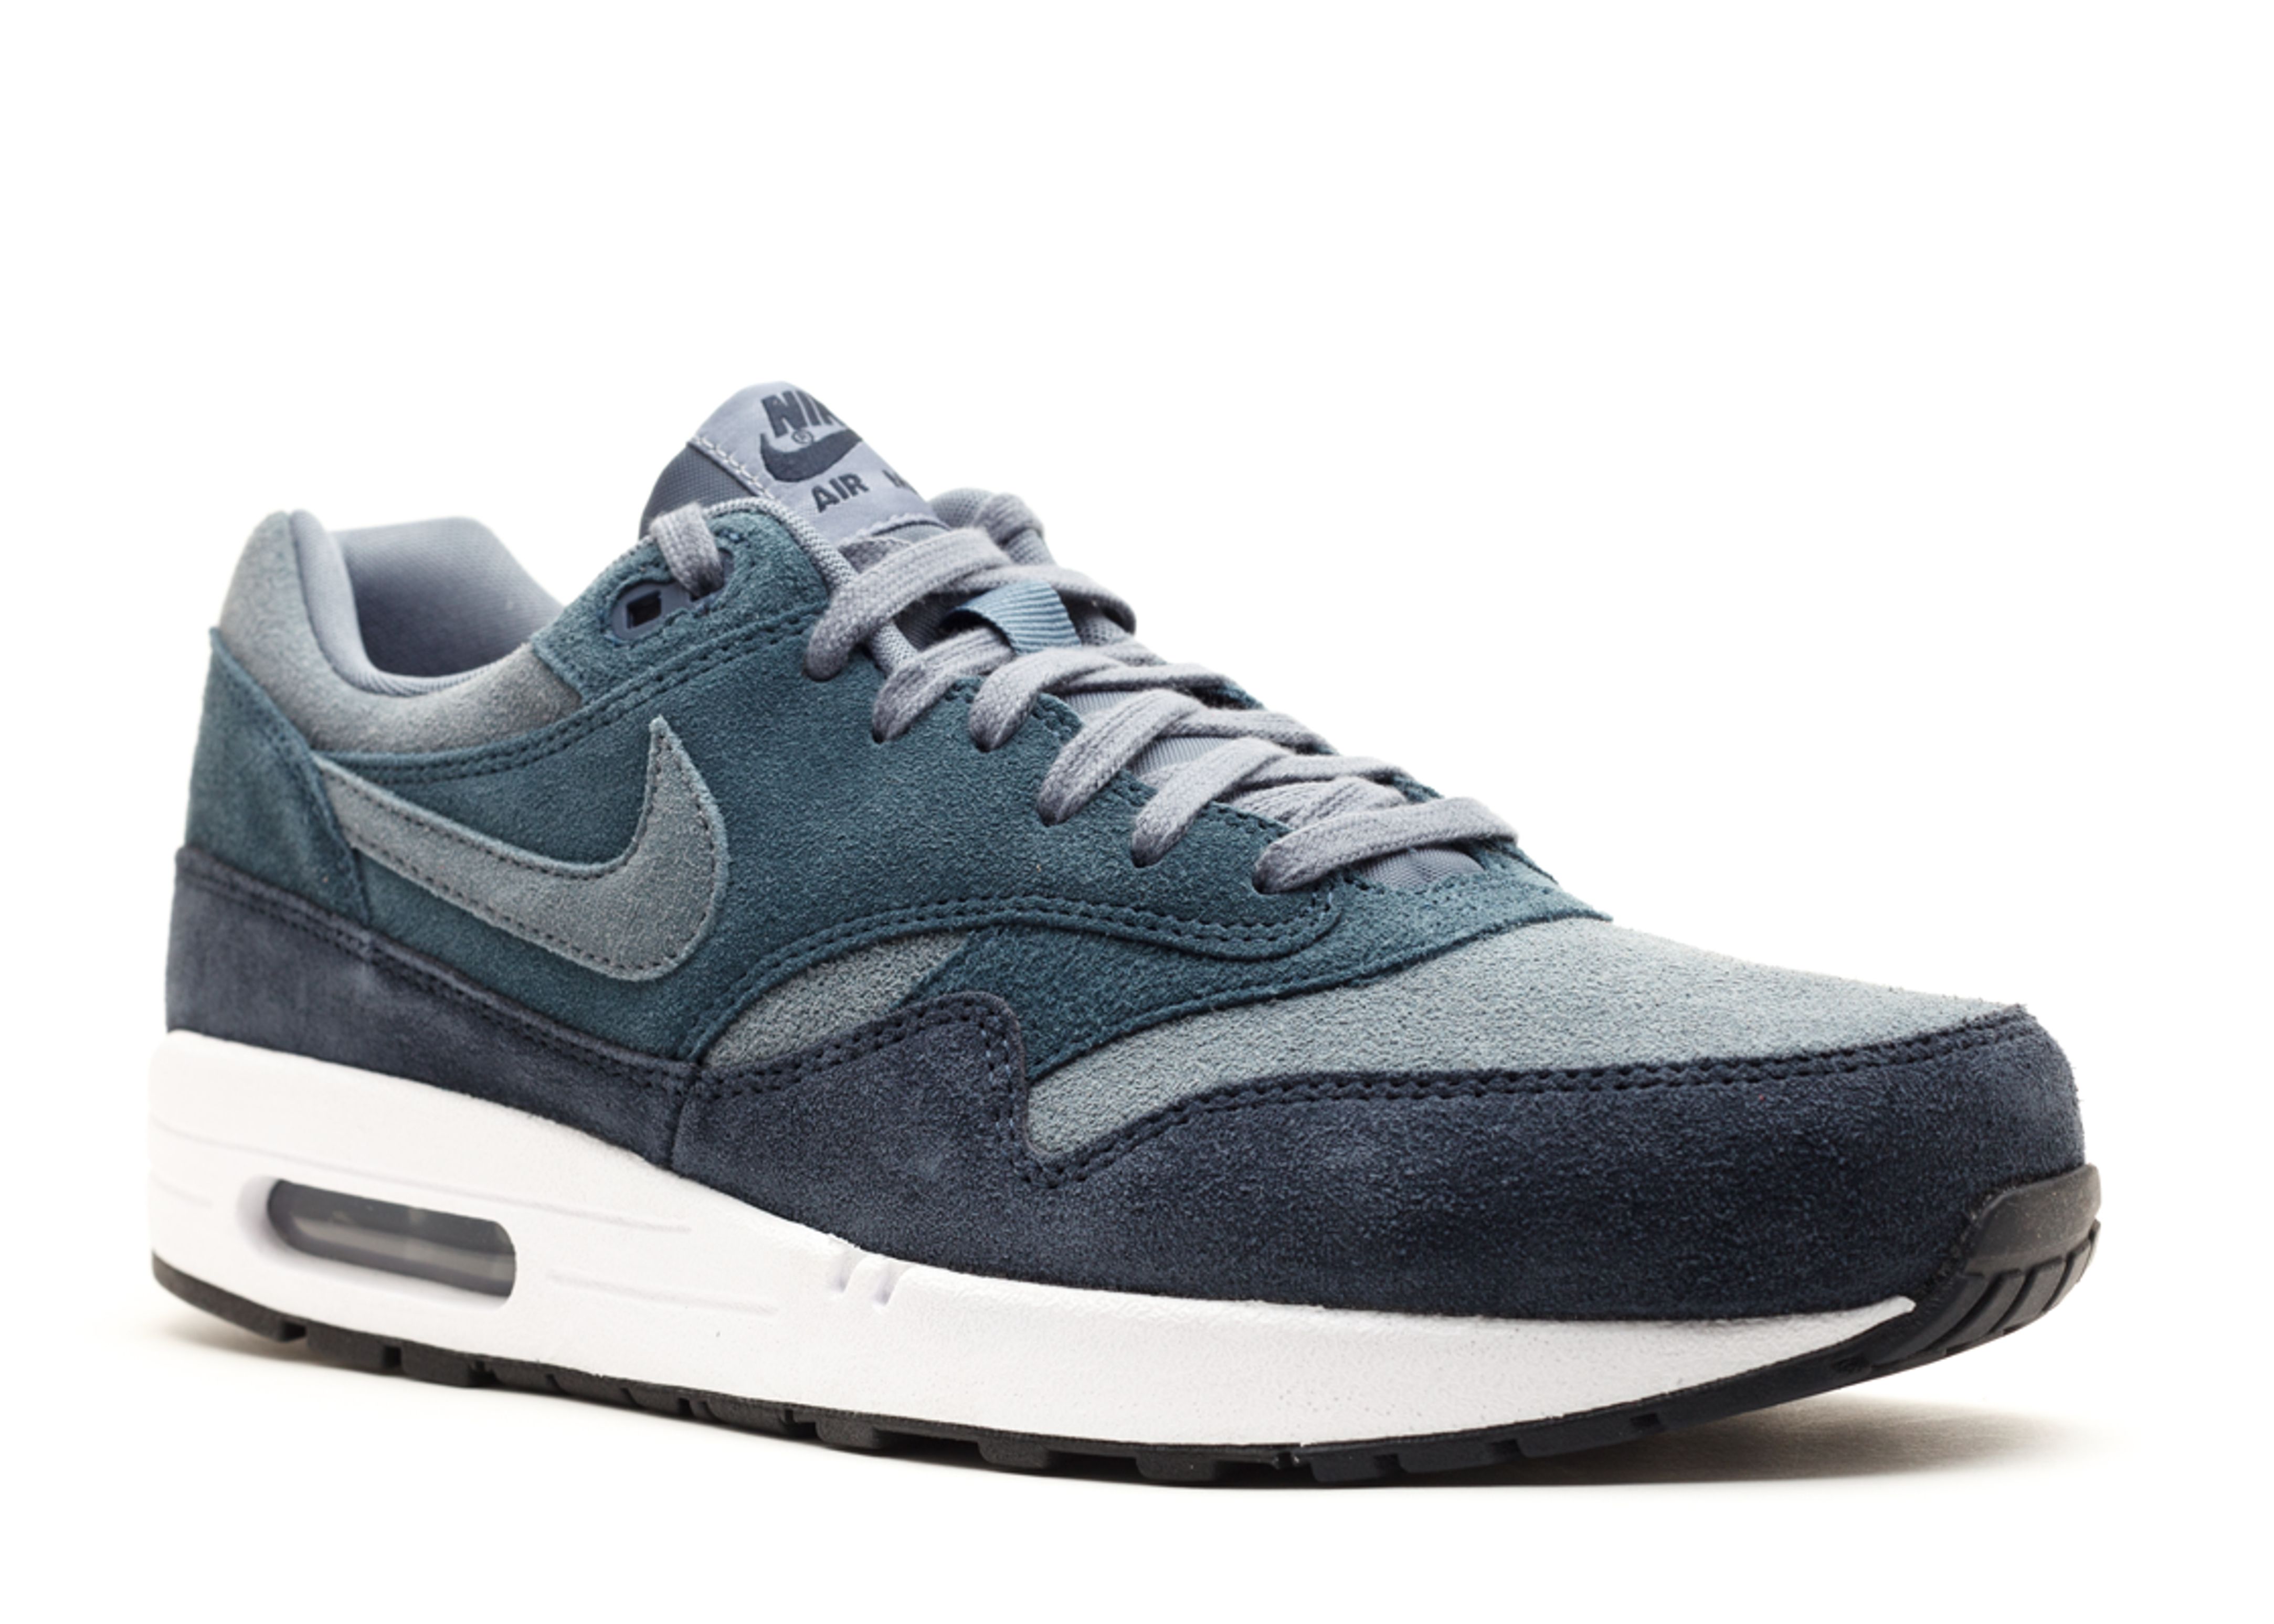 Nike Air Max 1 Armory Navy 2018 for Sale, Authenticity Guaranteed